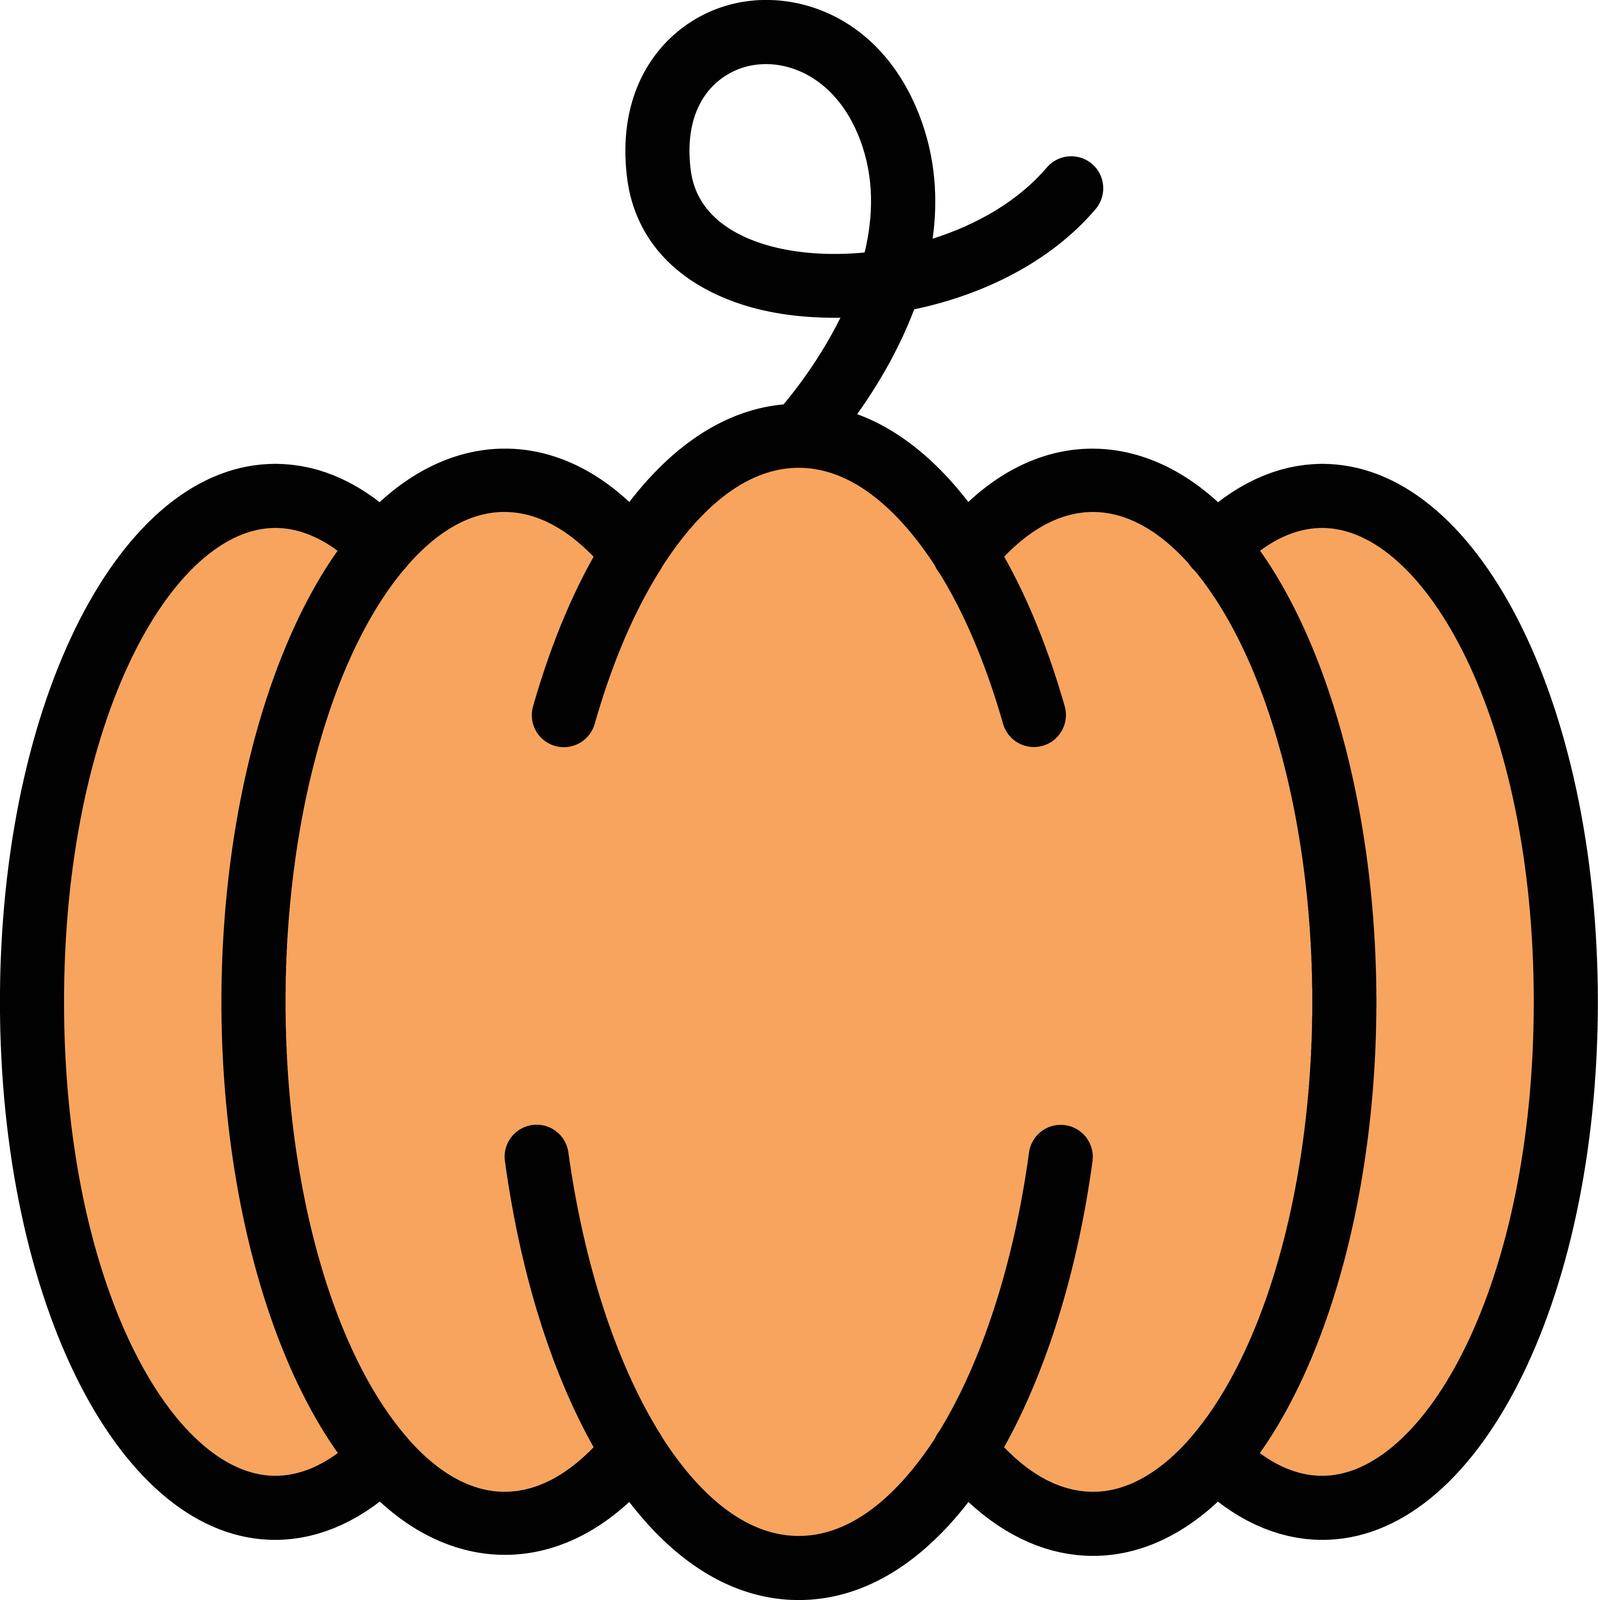 pumpkin Vector illustration on a transparent background. Premium quality symbols. Stroke vector icon for concept and graphic design.